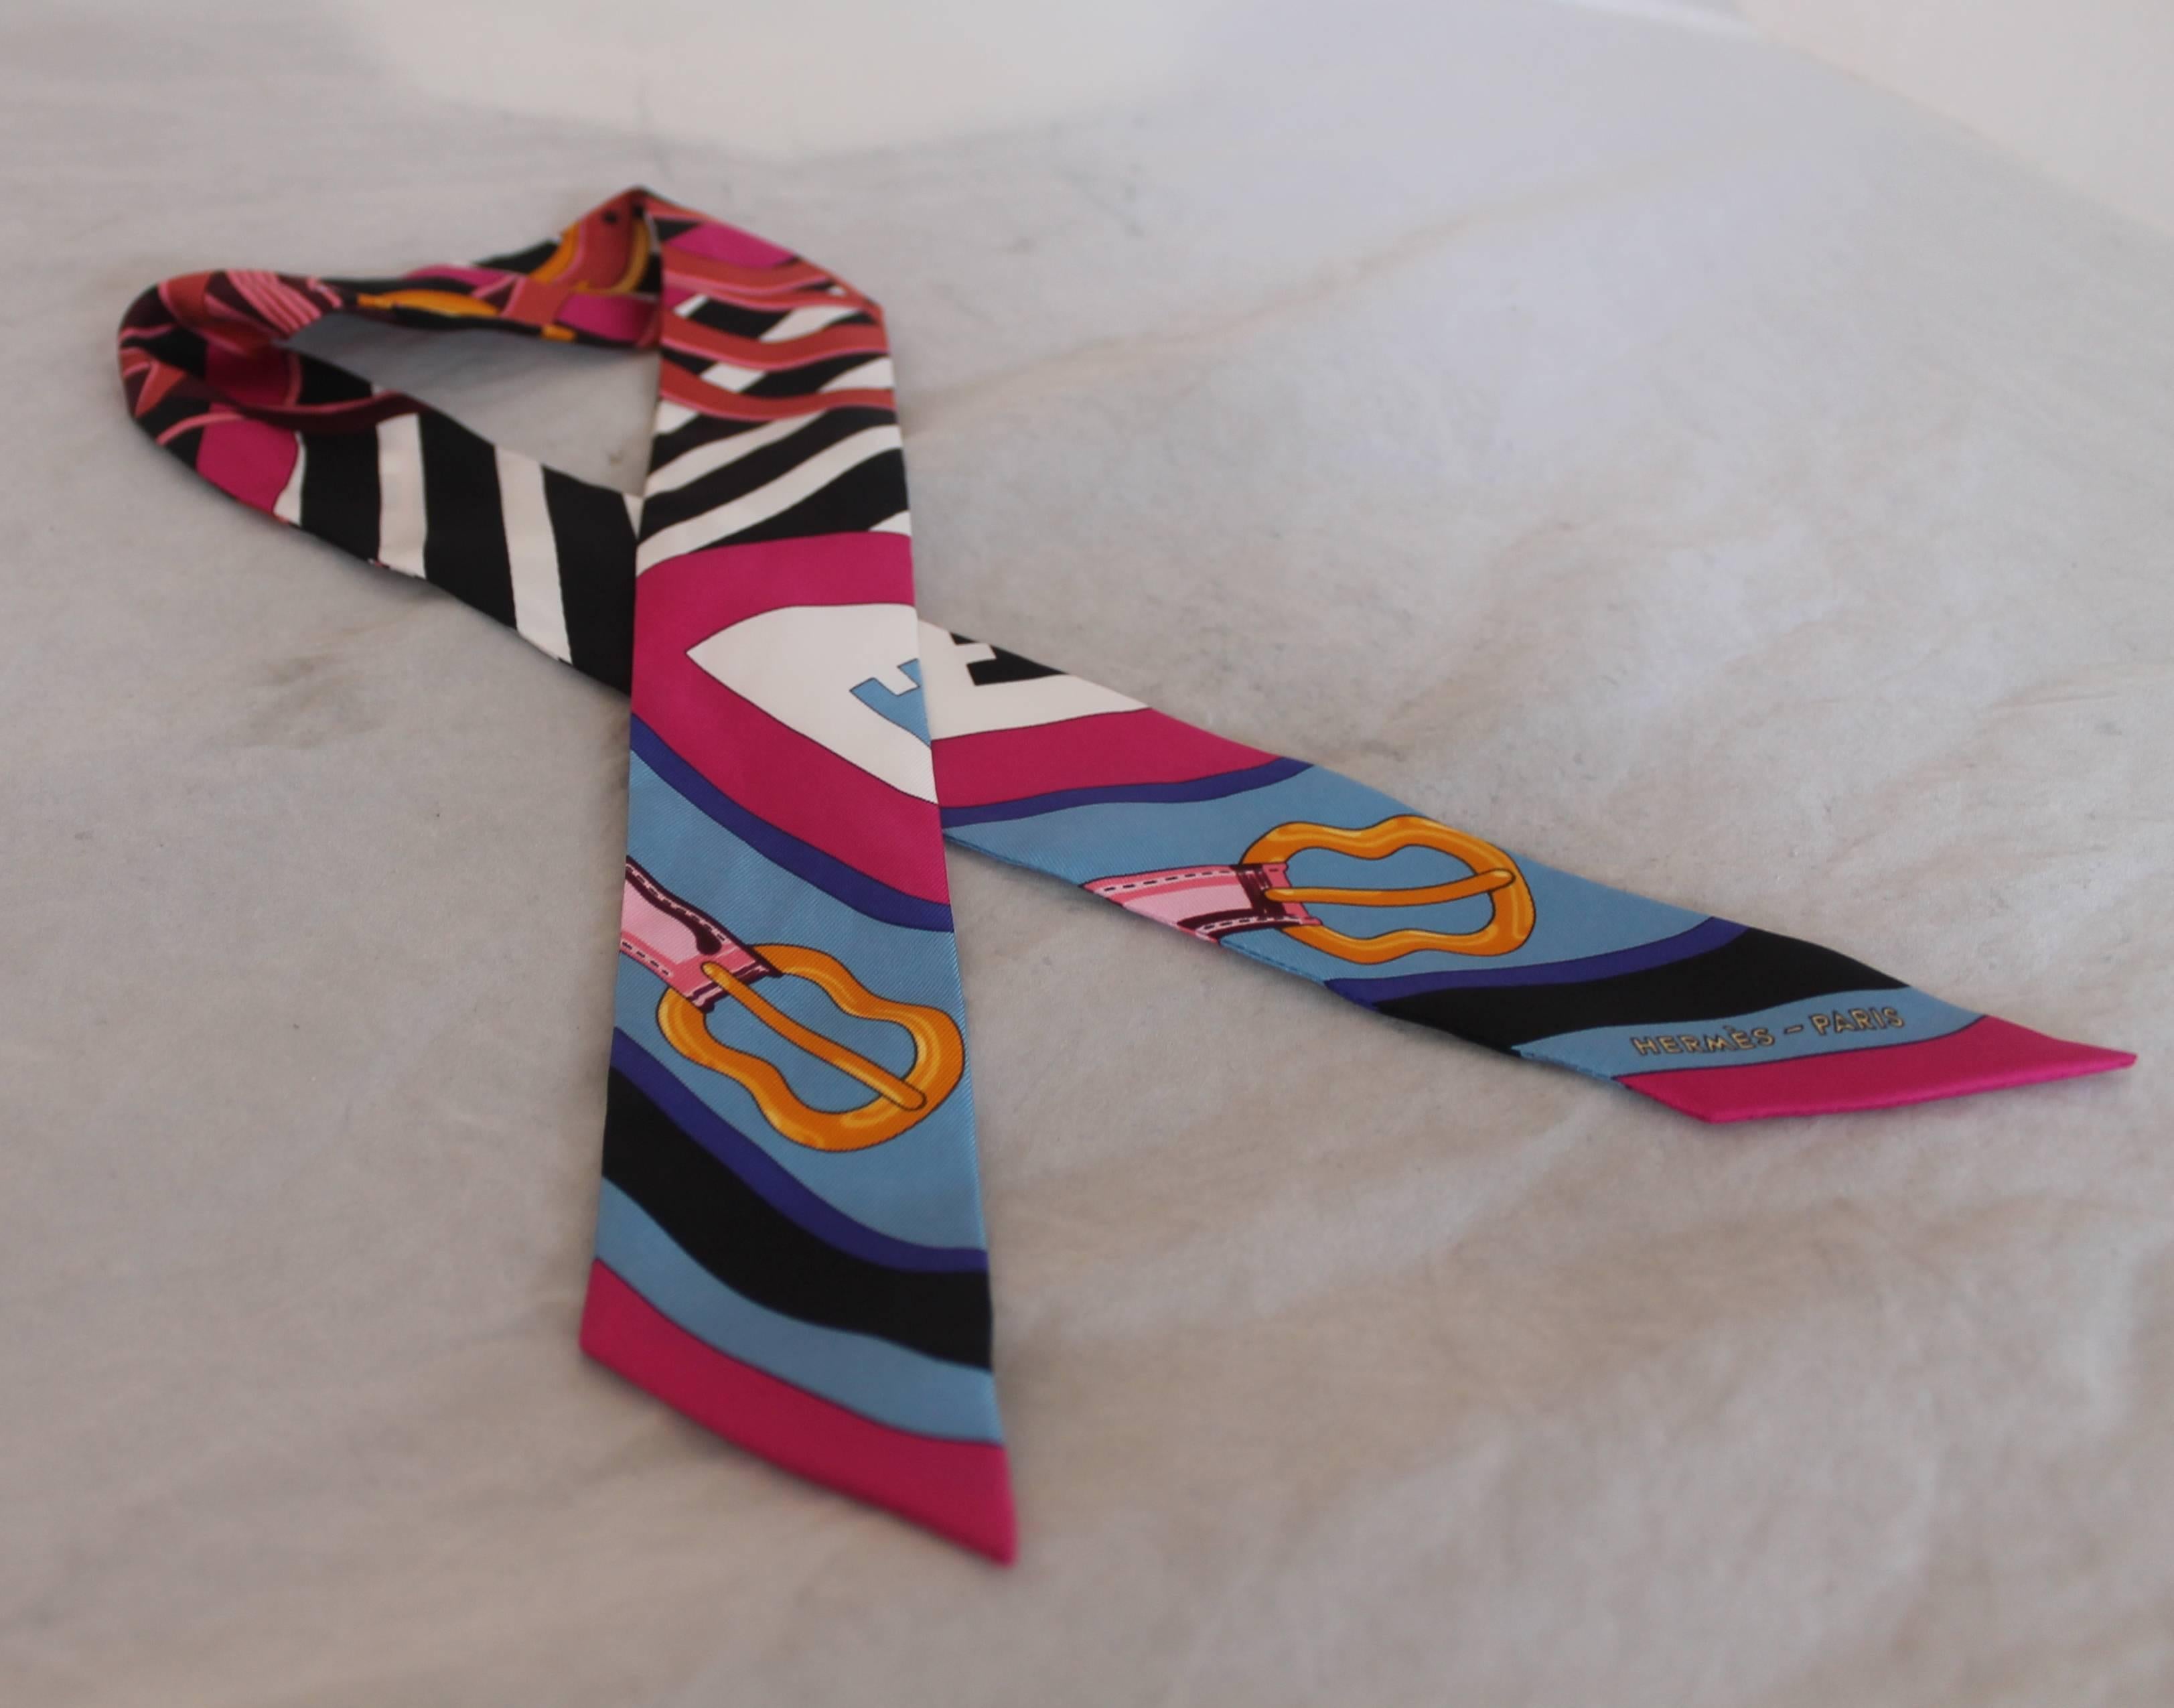 Hermes Multicolor Silk Equestrian Print Twill. This piece is in excellent condition and has black, white, blues & pinks. It has stripes and some belts on the print.

Measurements:
Length- 34.5